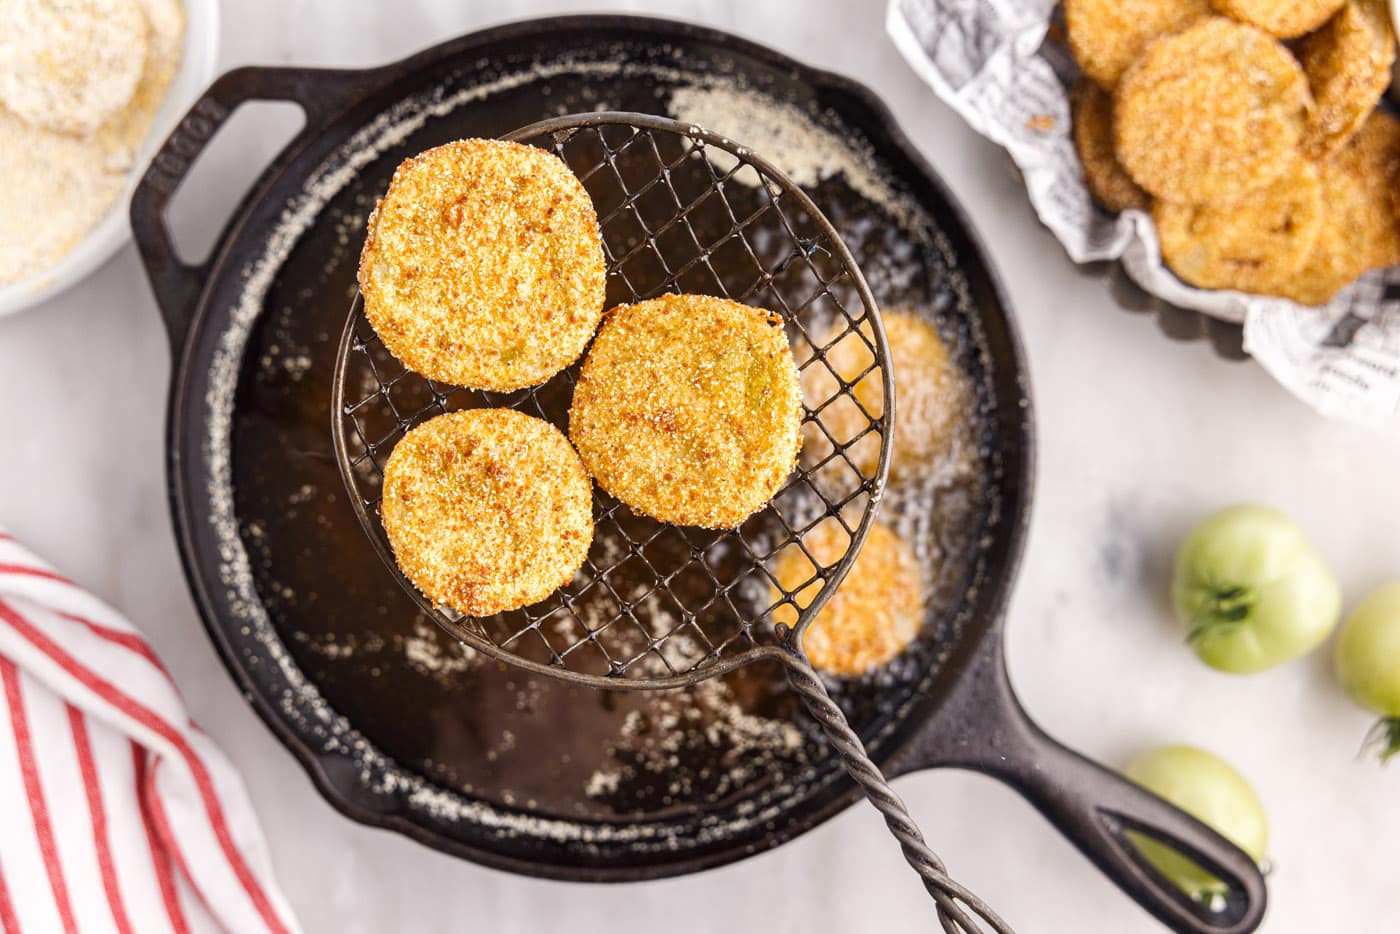 fried green tomatoes over hot oil